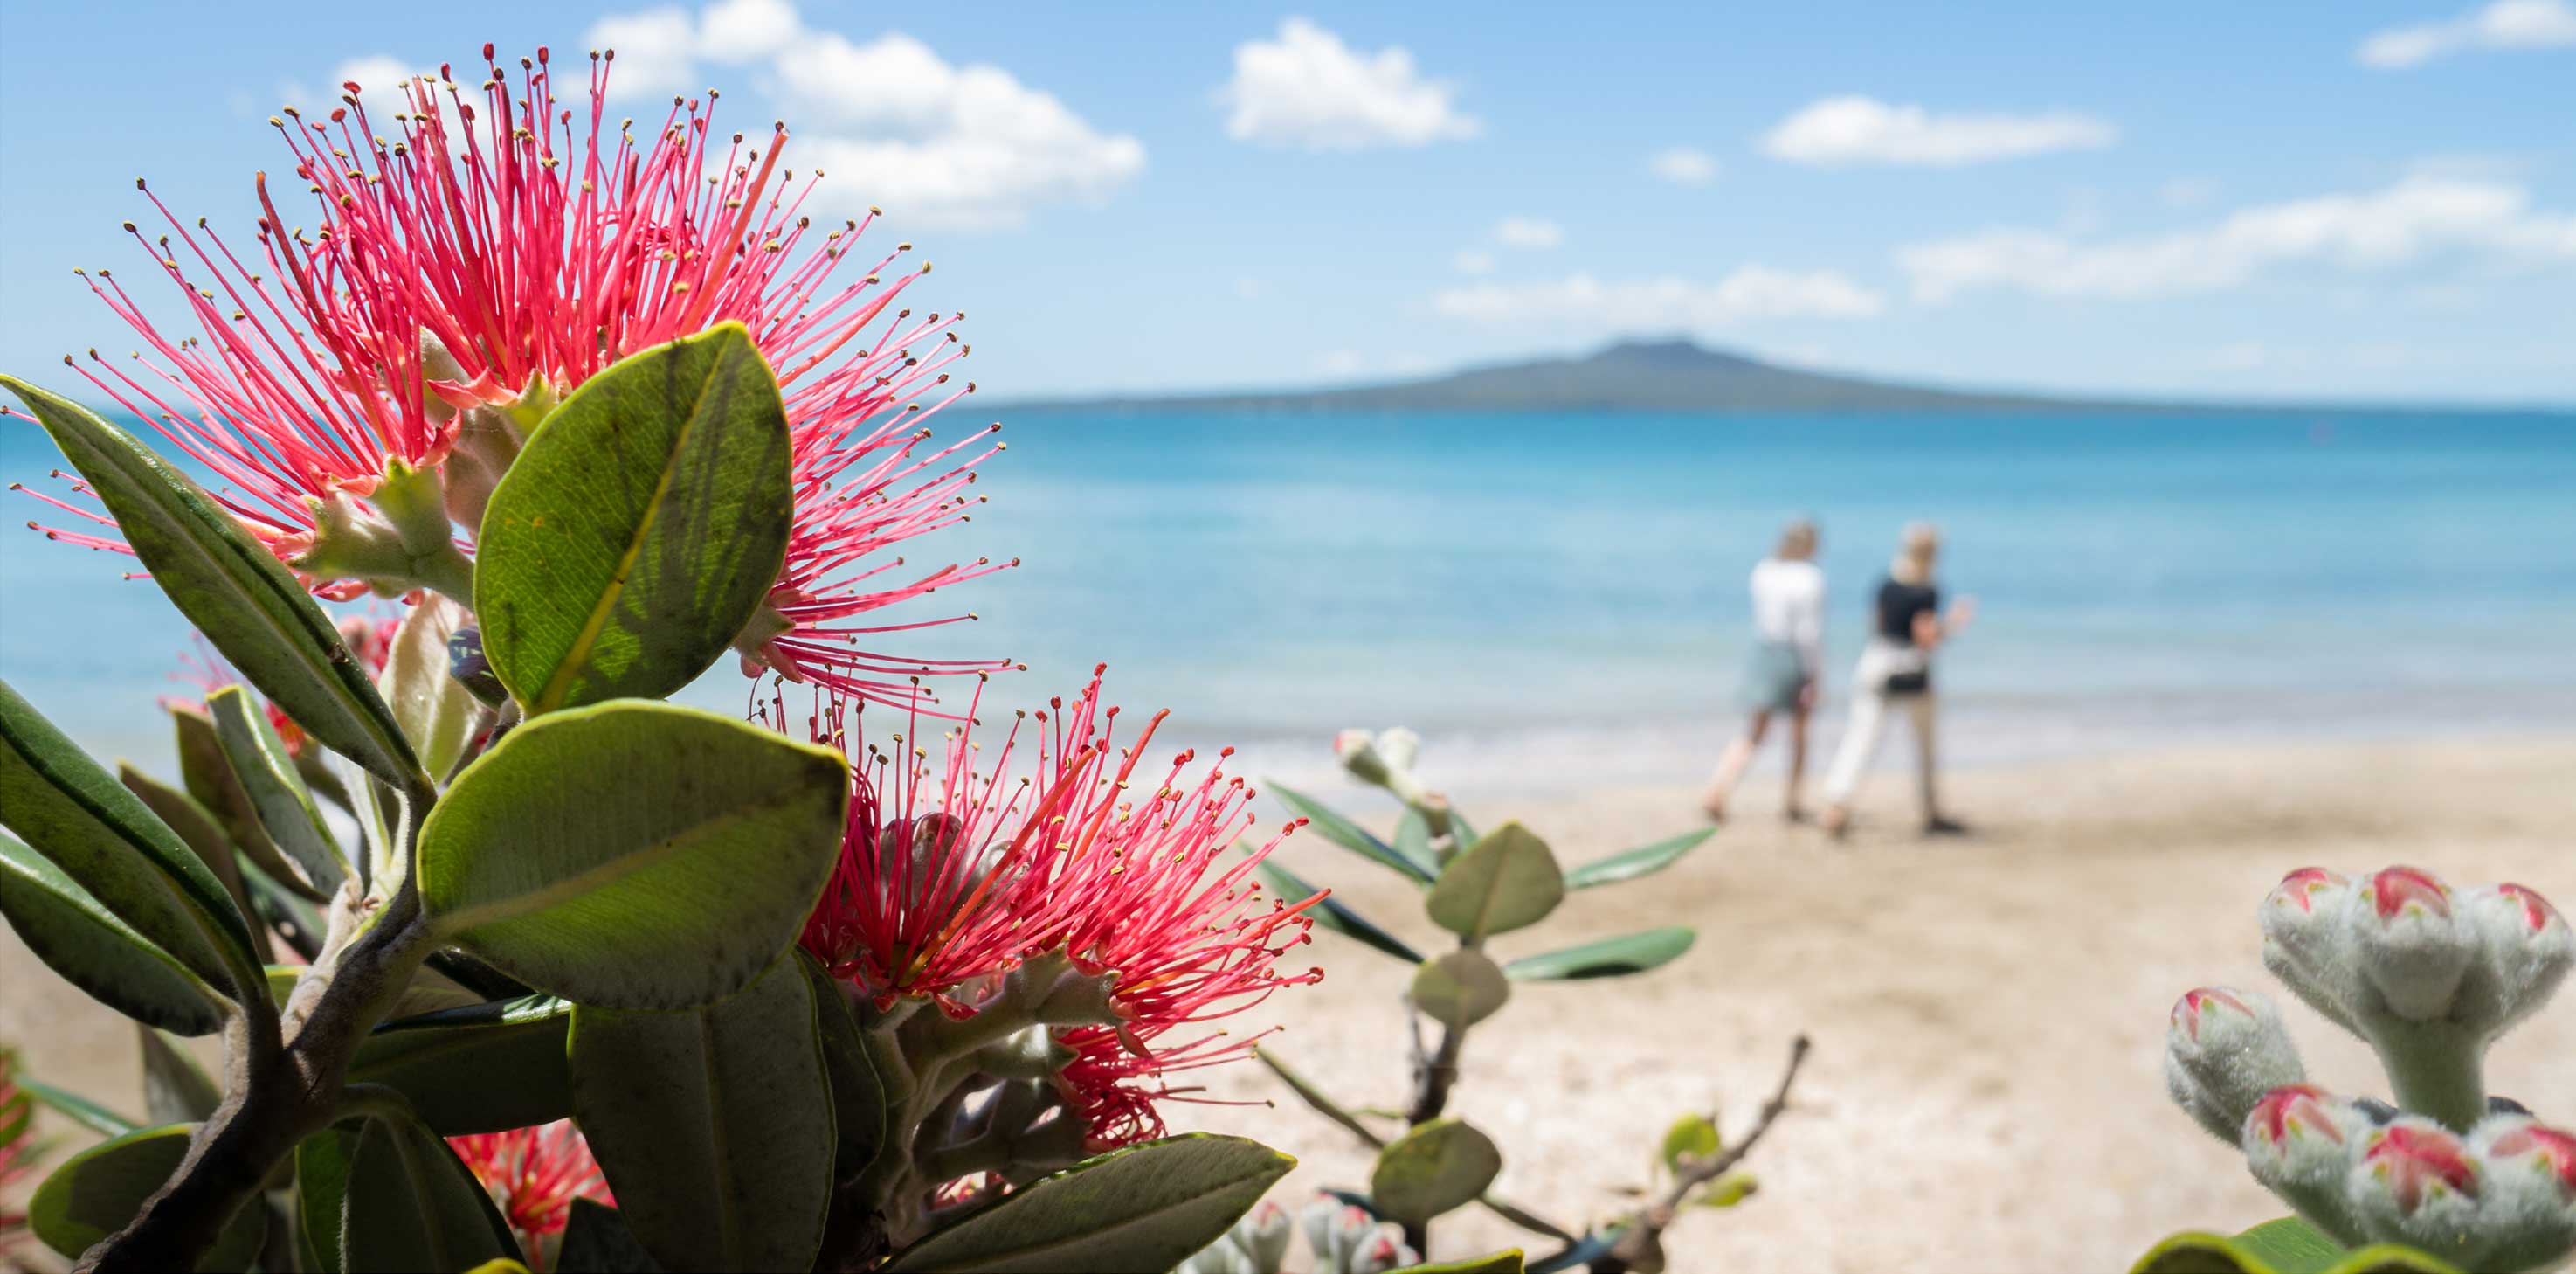 Two people walk along a beach in the background. There are red native flowers in the foreground.